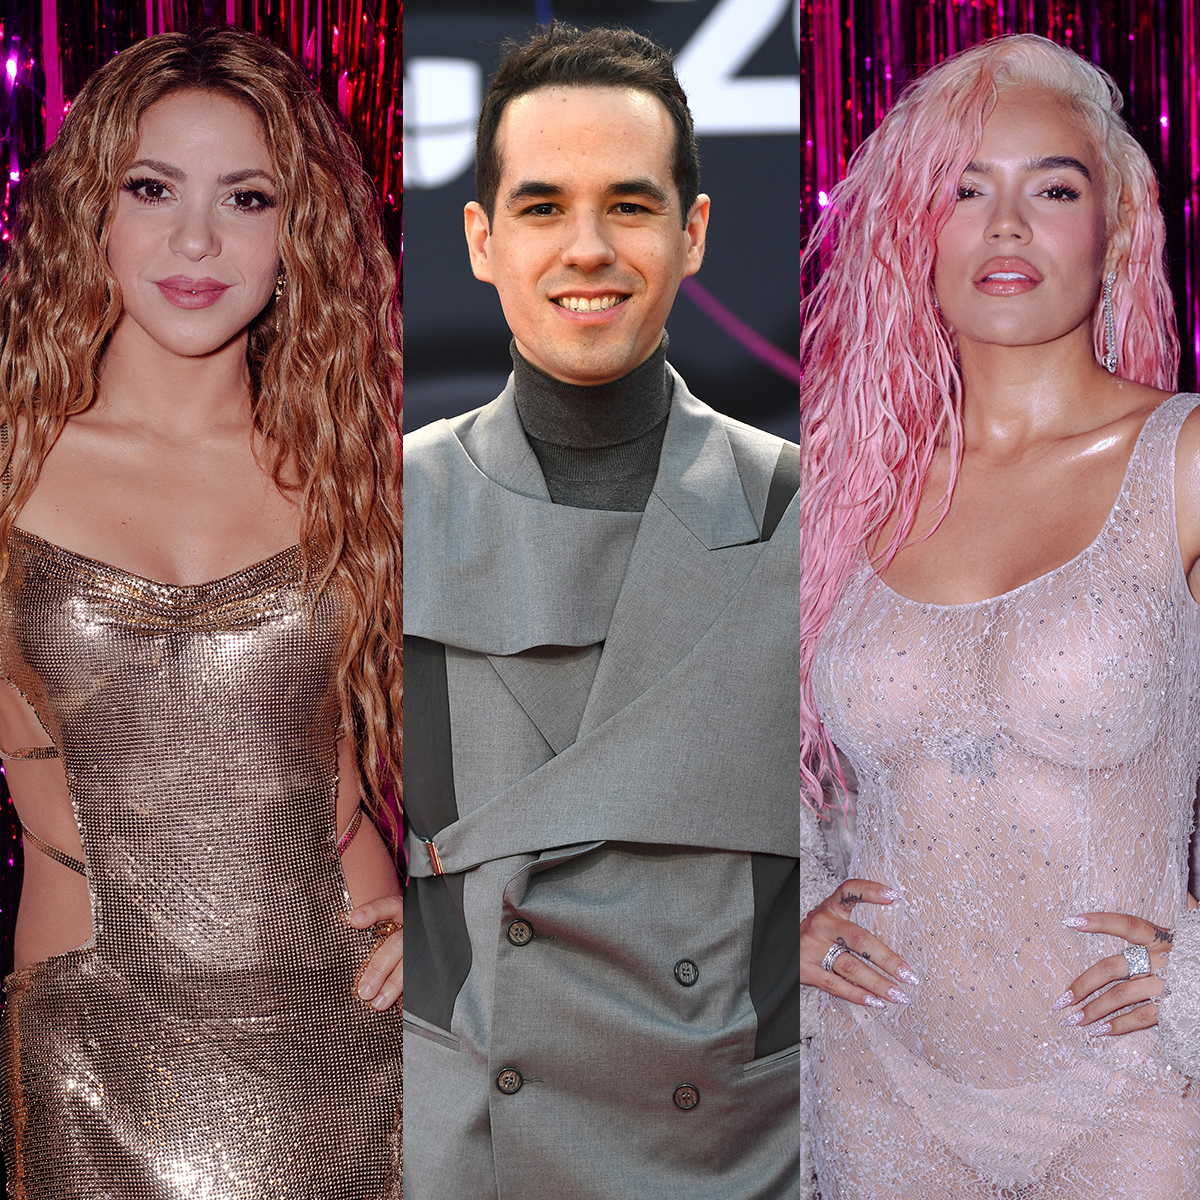 Latin Grammys 2022: The Complete Winners List